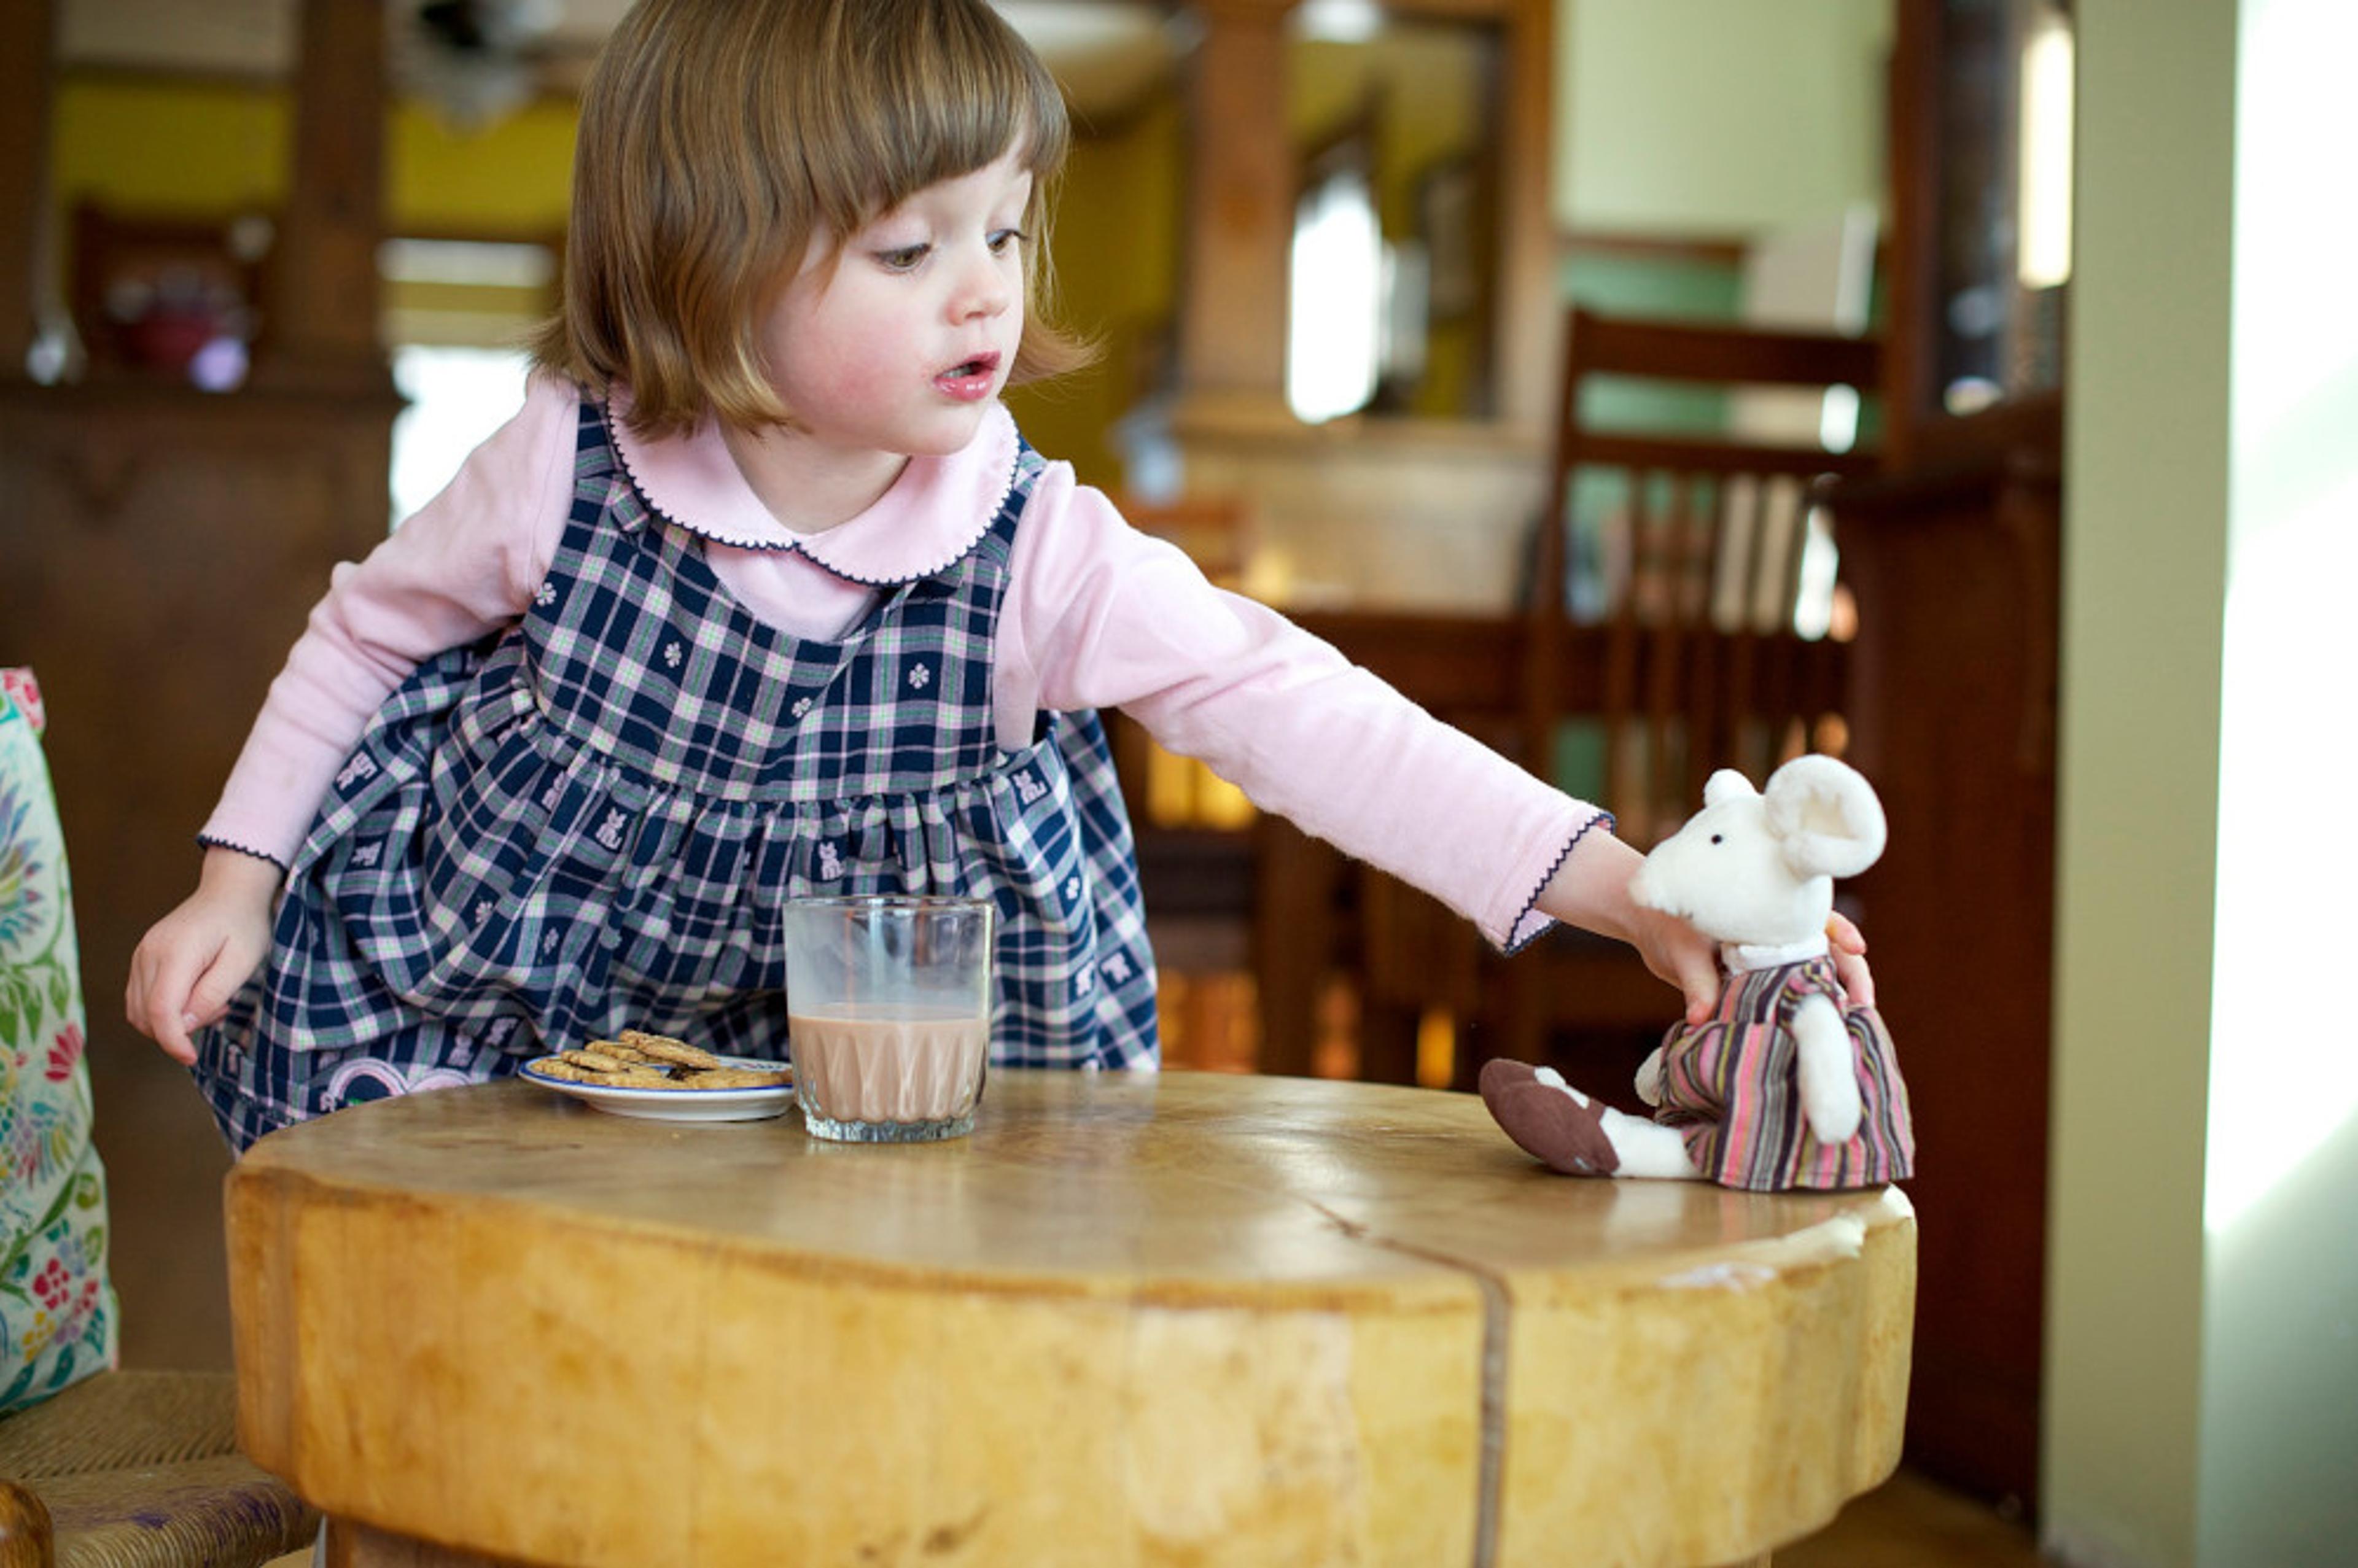 A little girl playing with a stuffed animal while having a glass of chocolate milk.